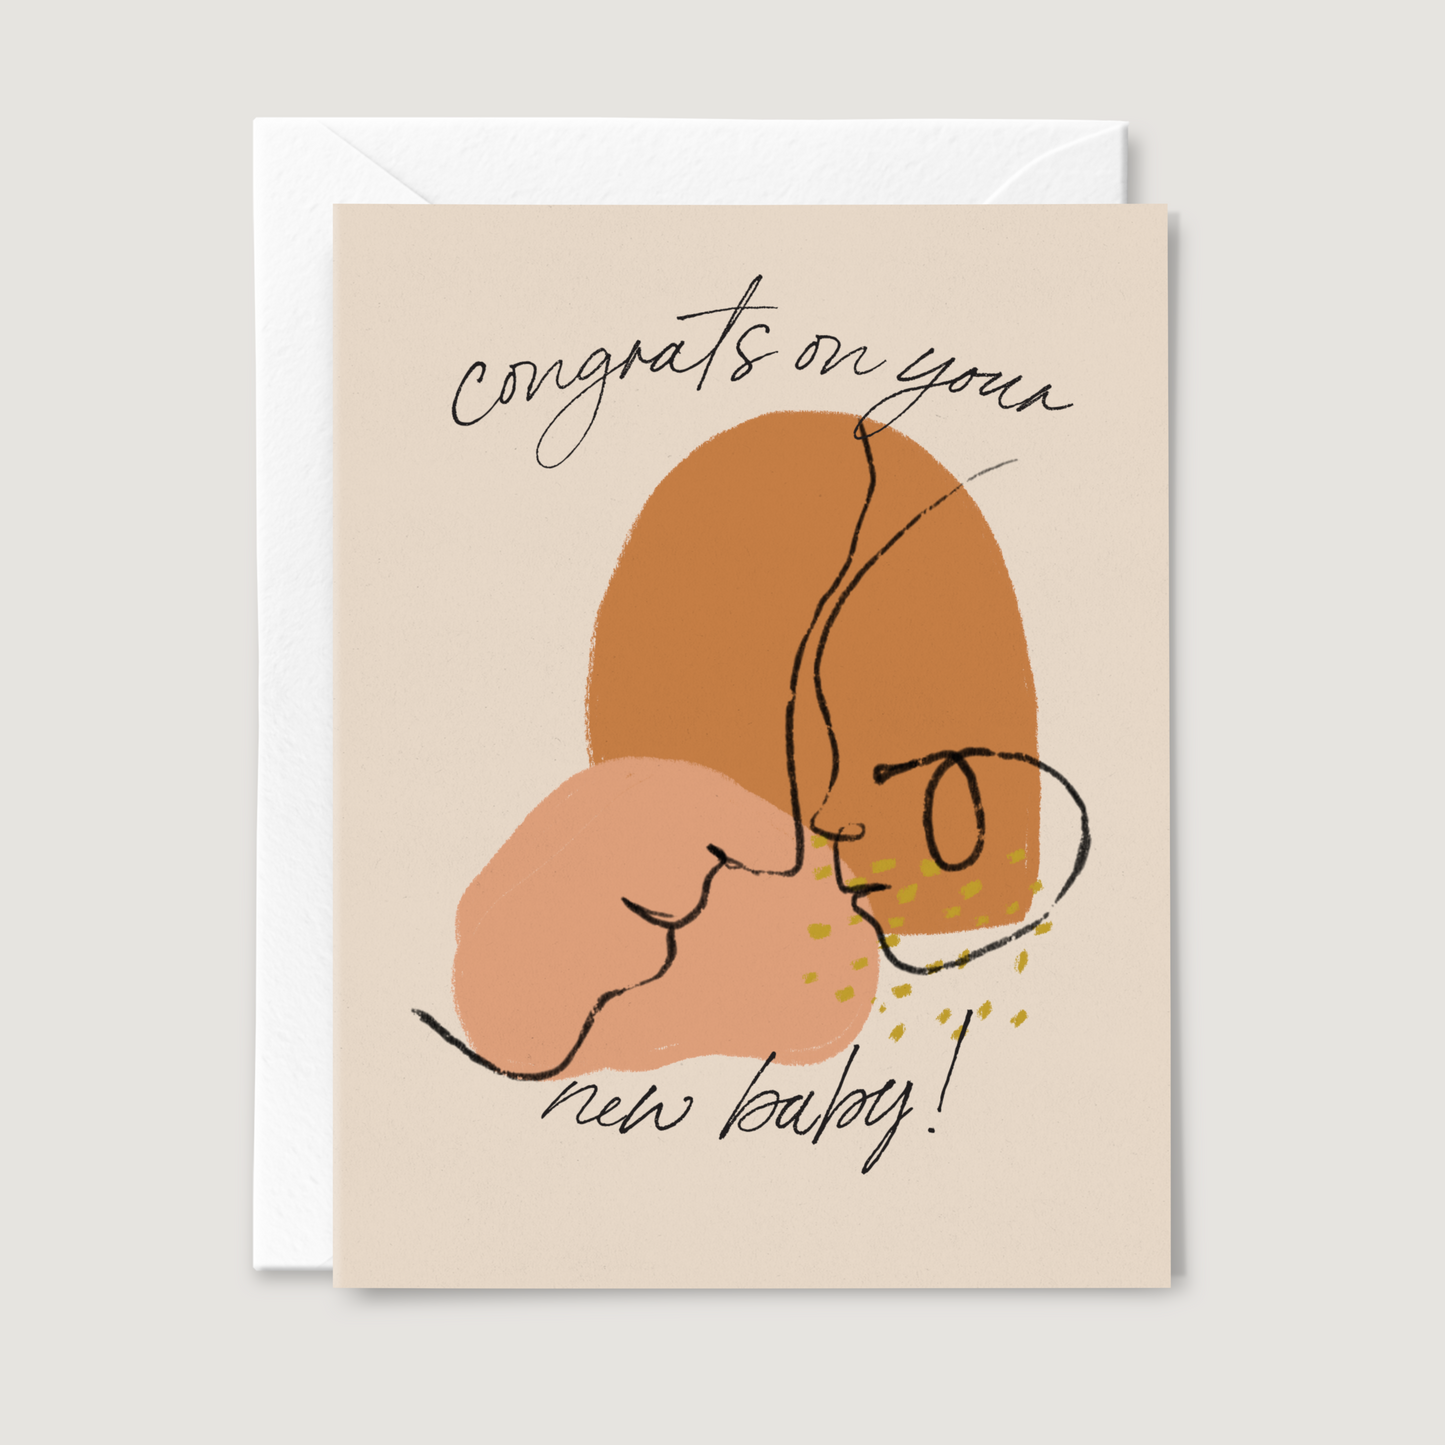 congrats on your baby card